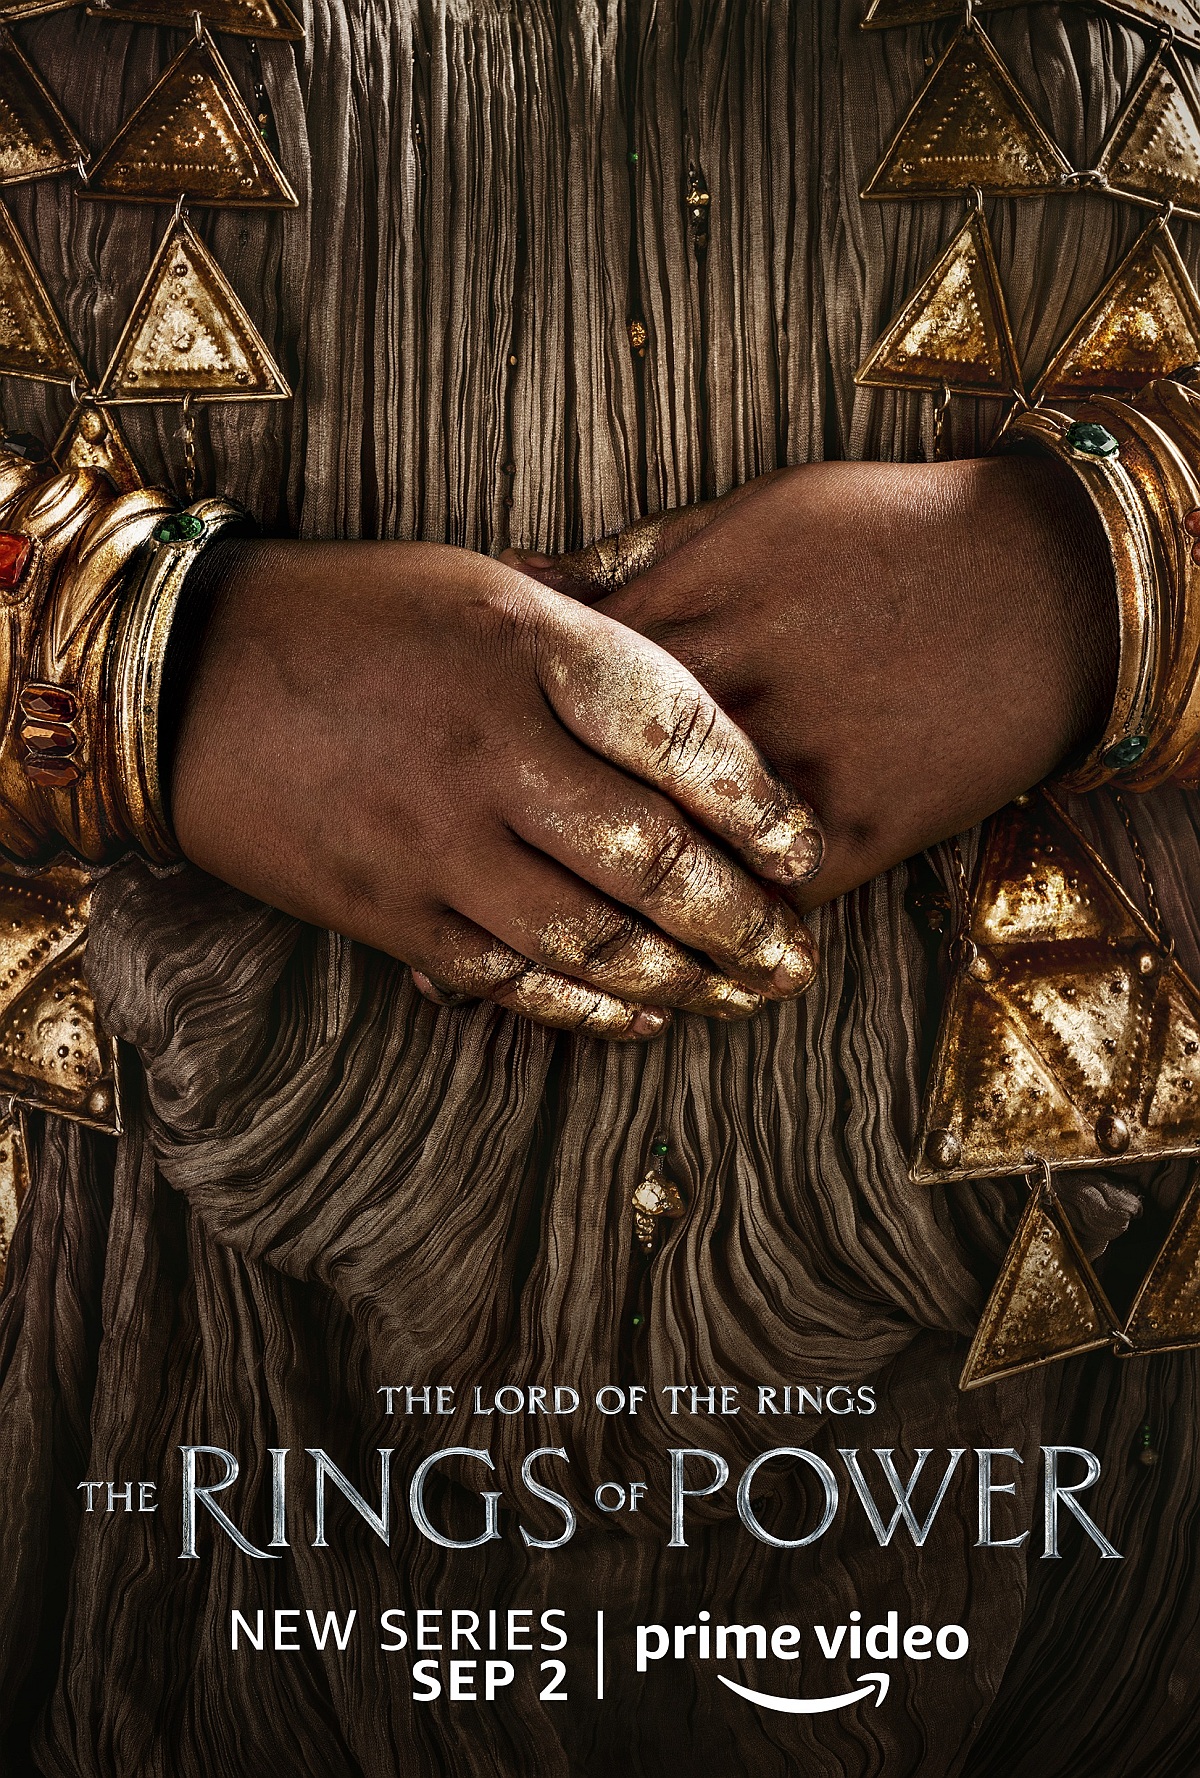  The Lord of the Rings: The Rings of Power